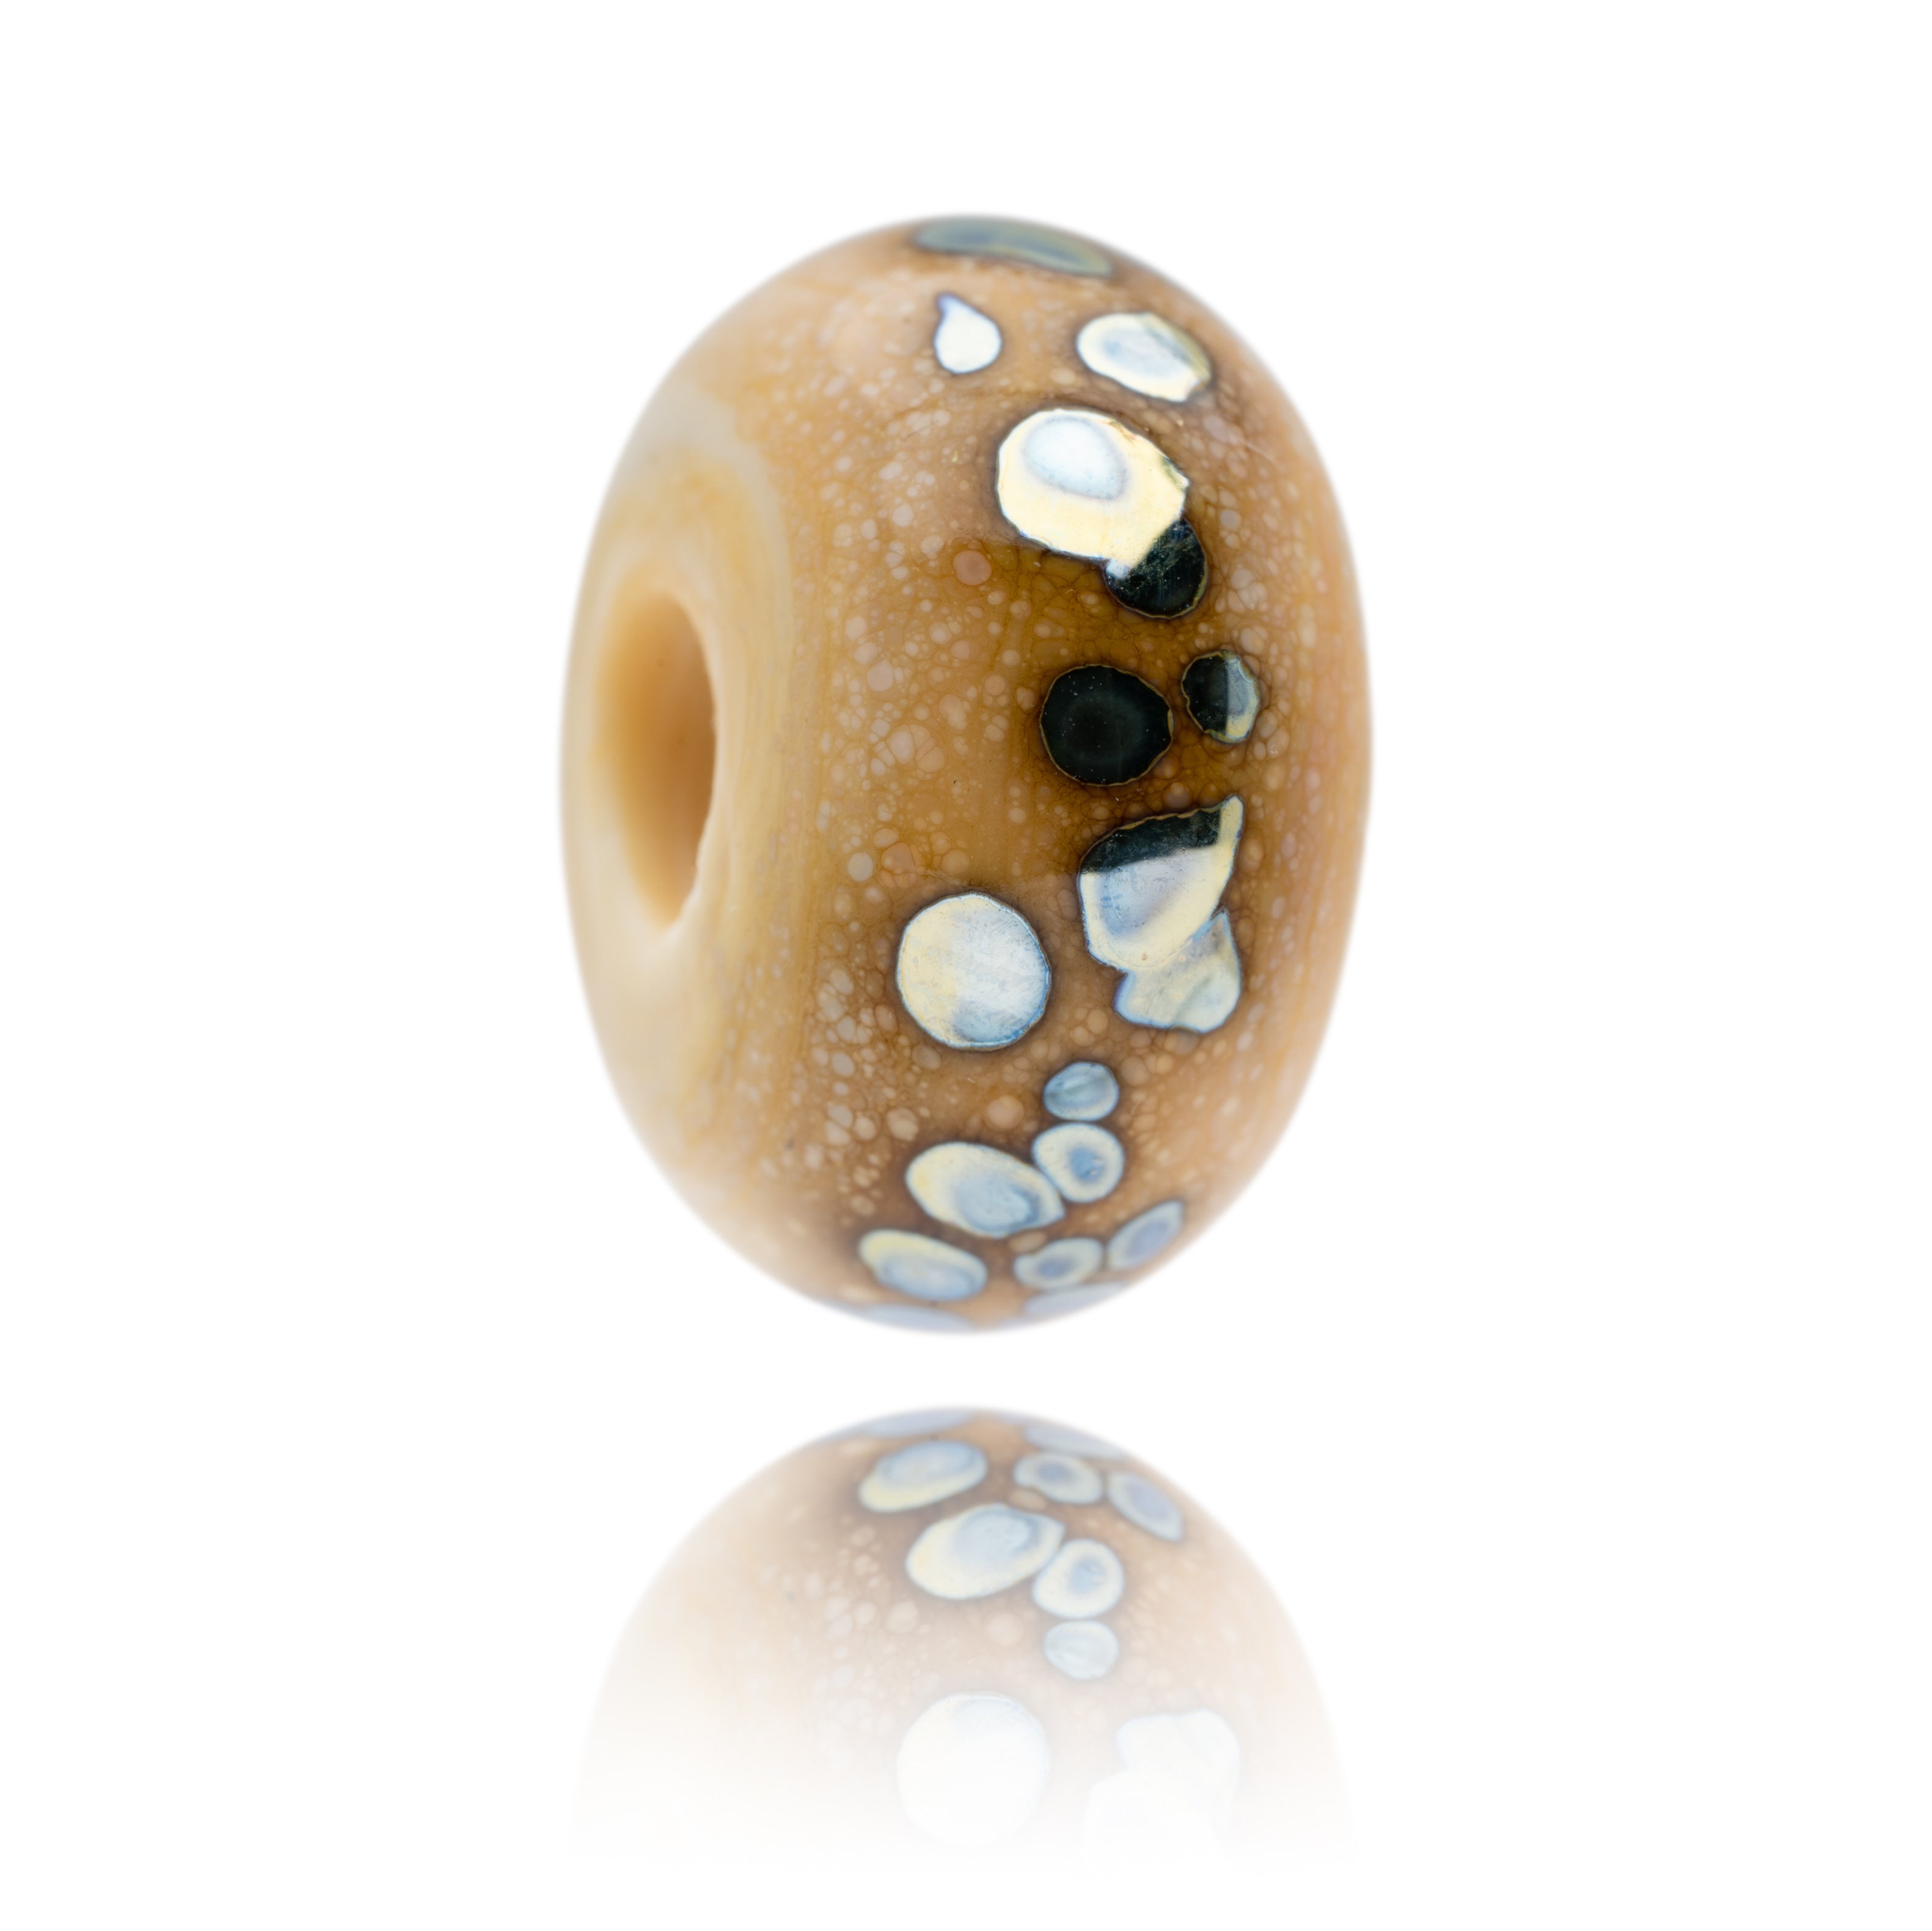 The Lake District National Park Bead